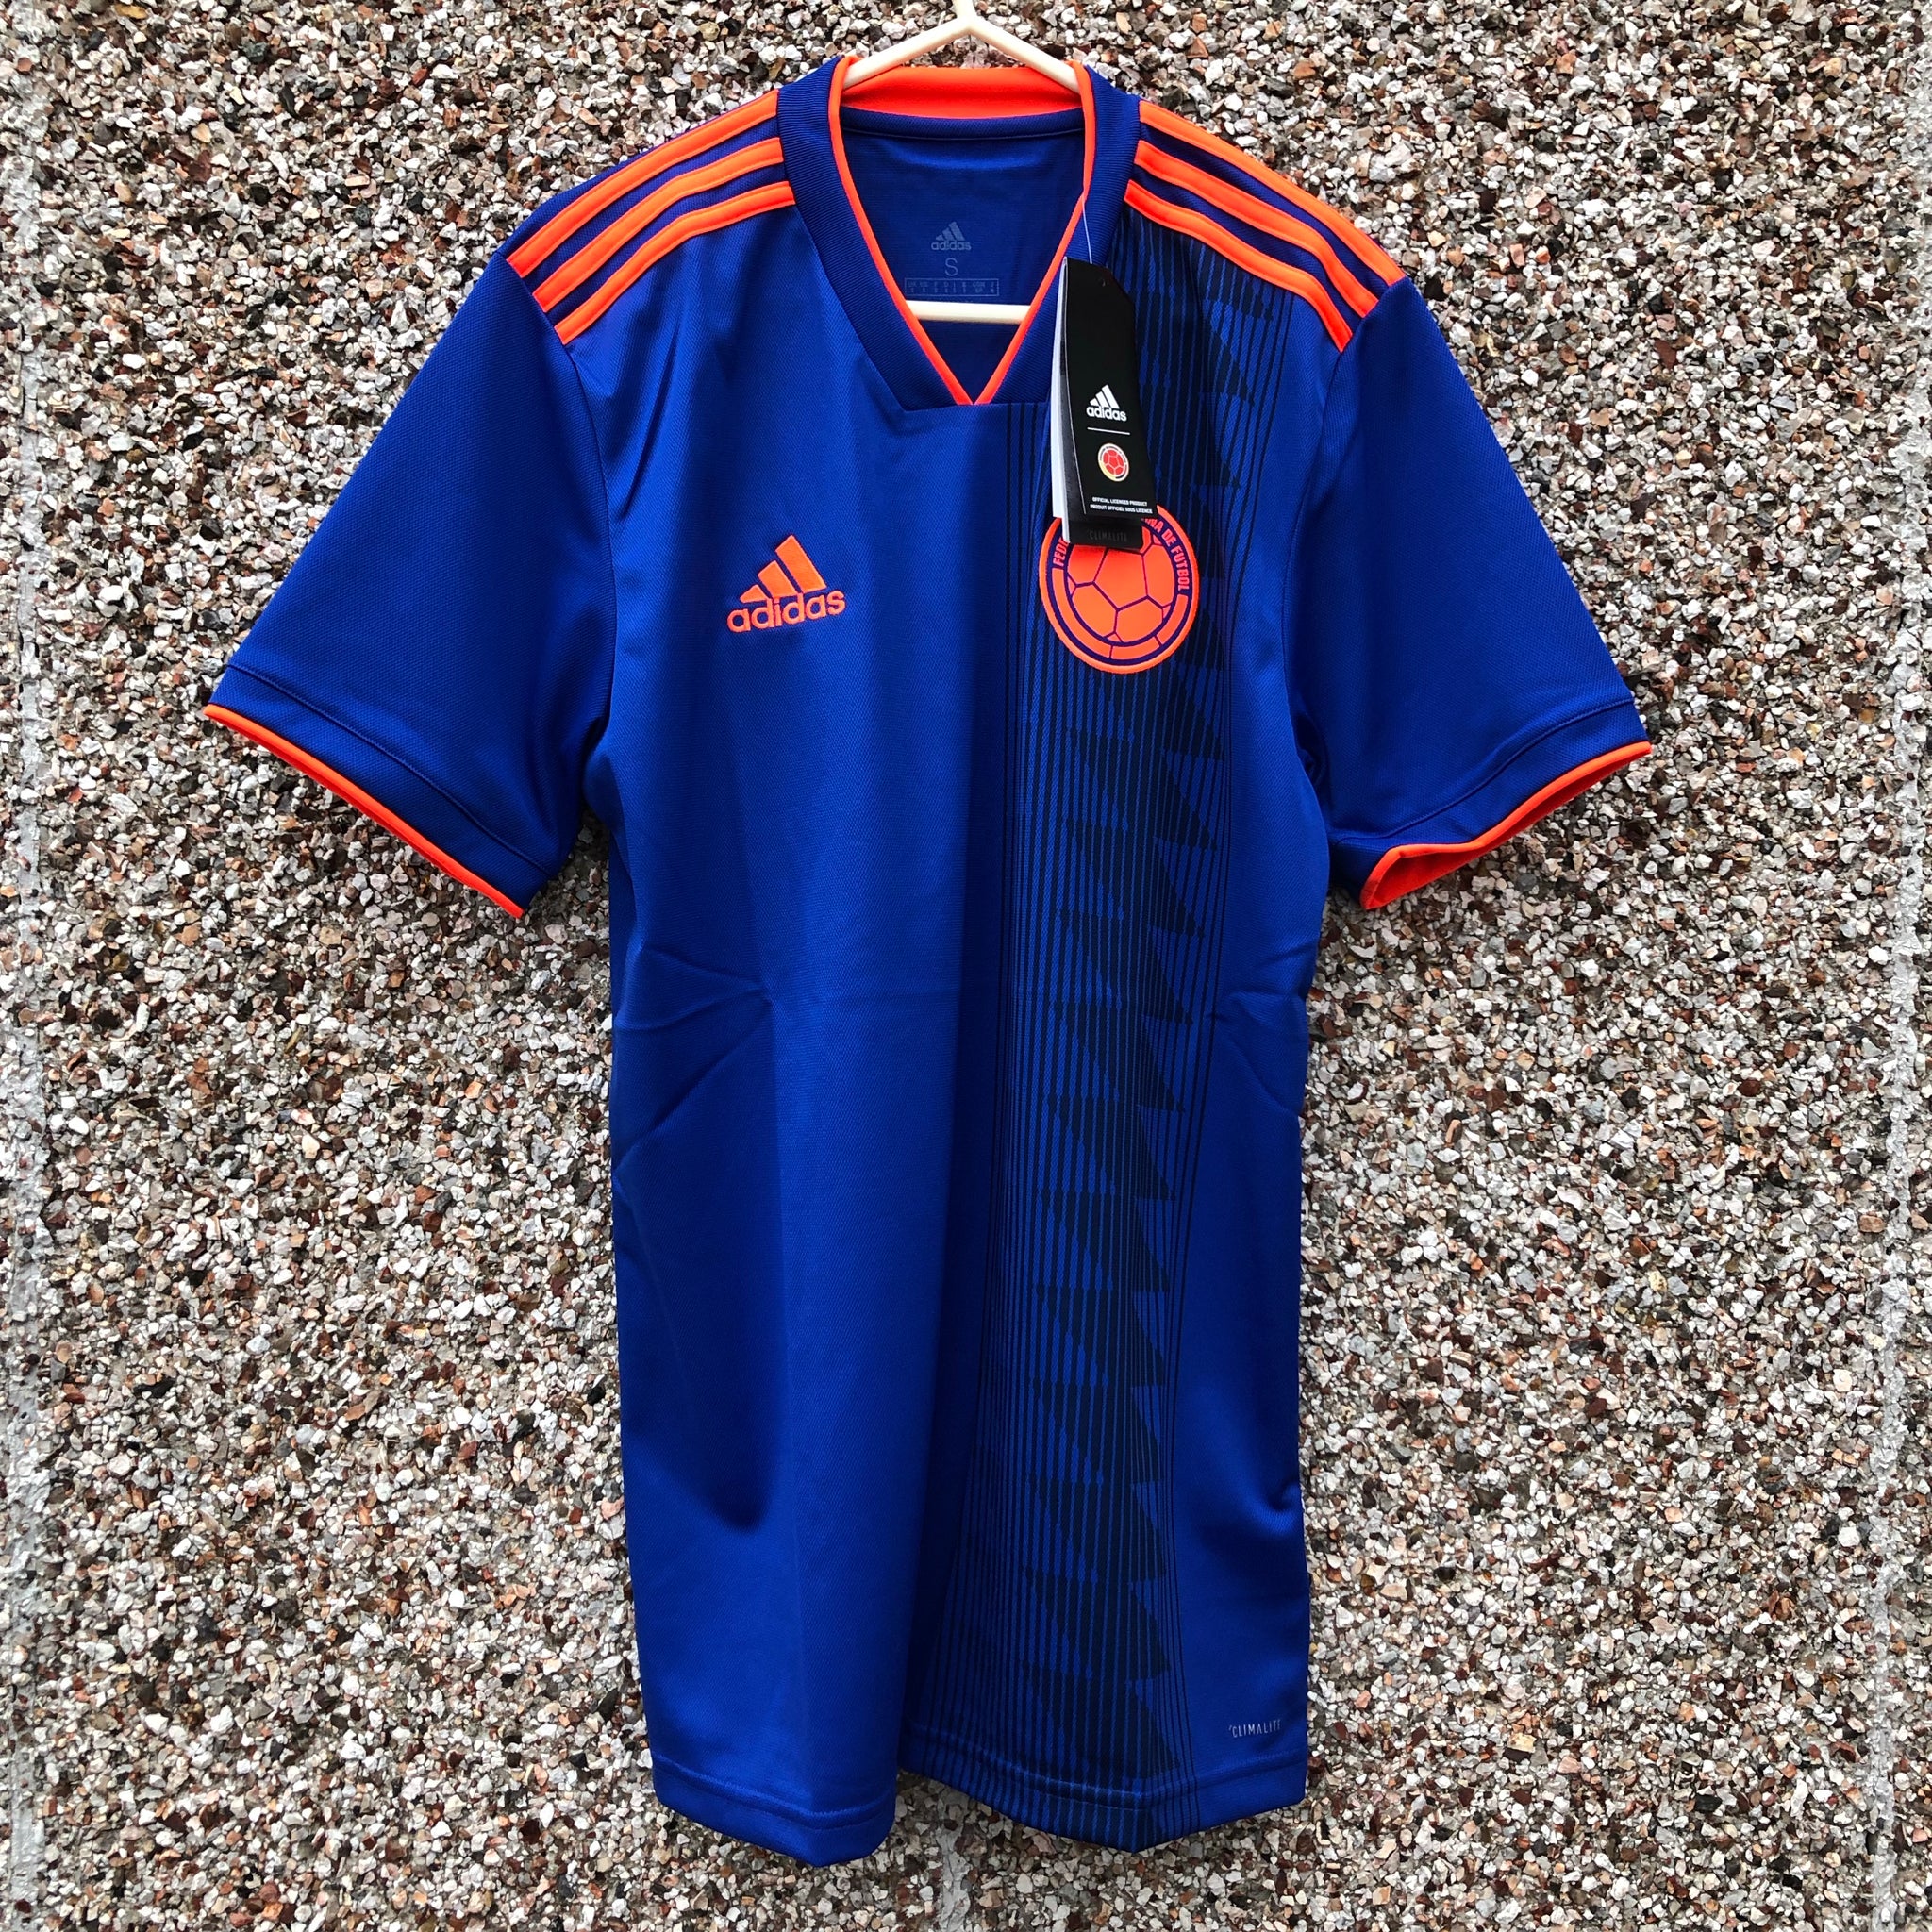 colombia away jersey 2018